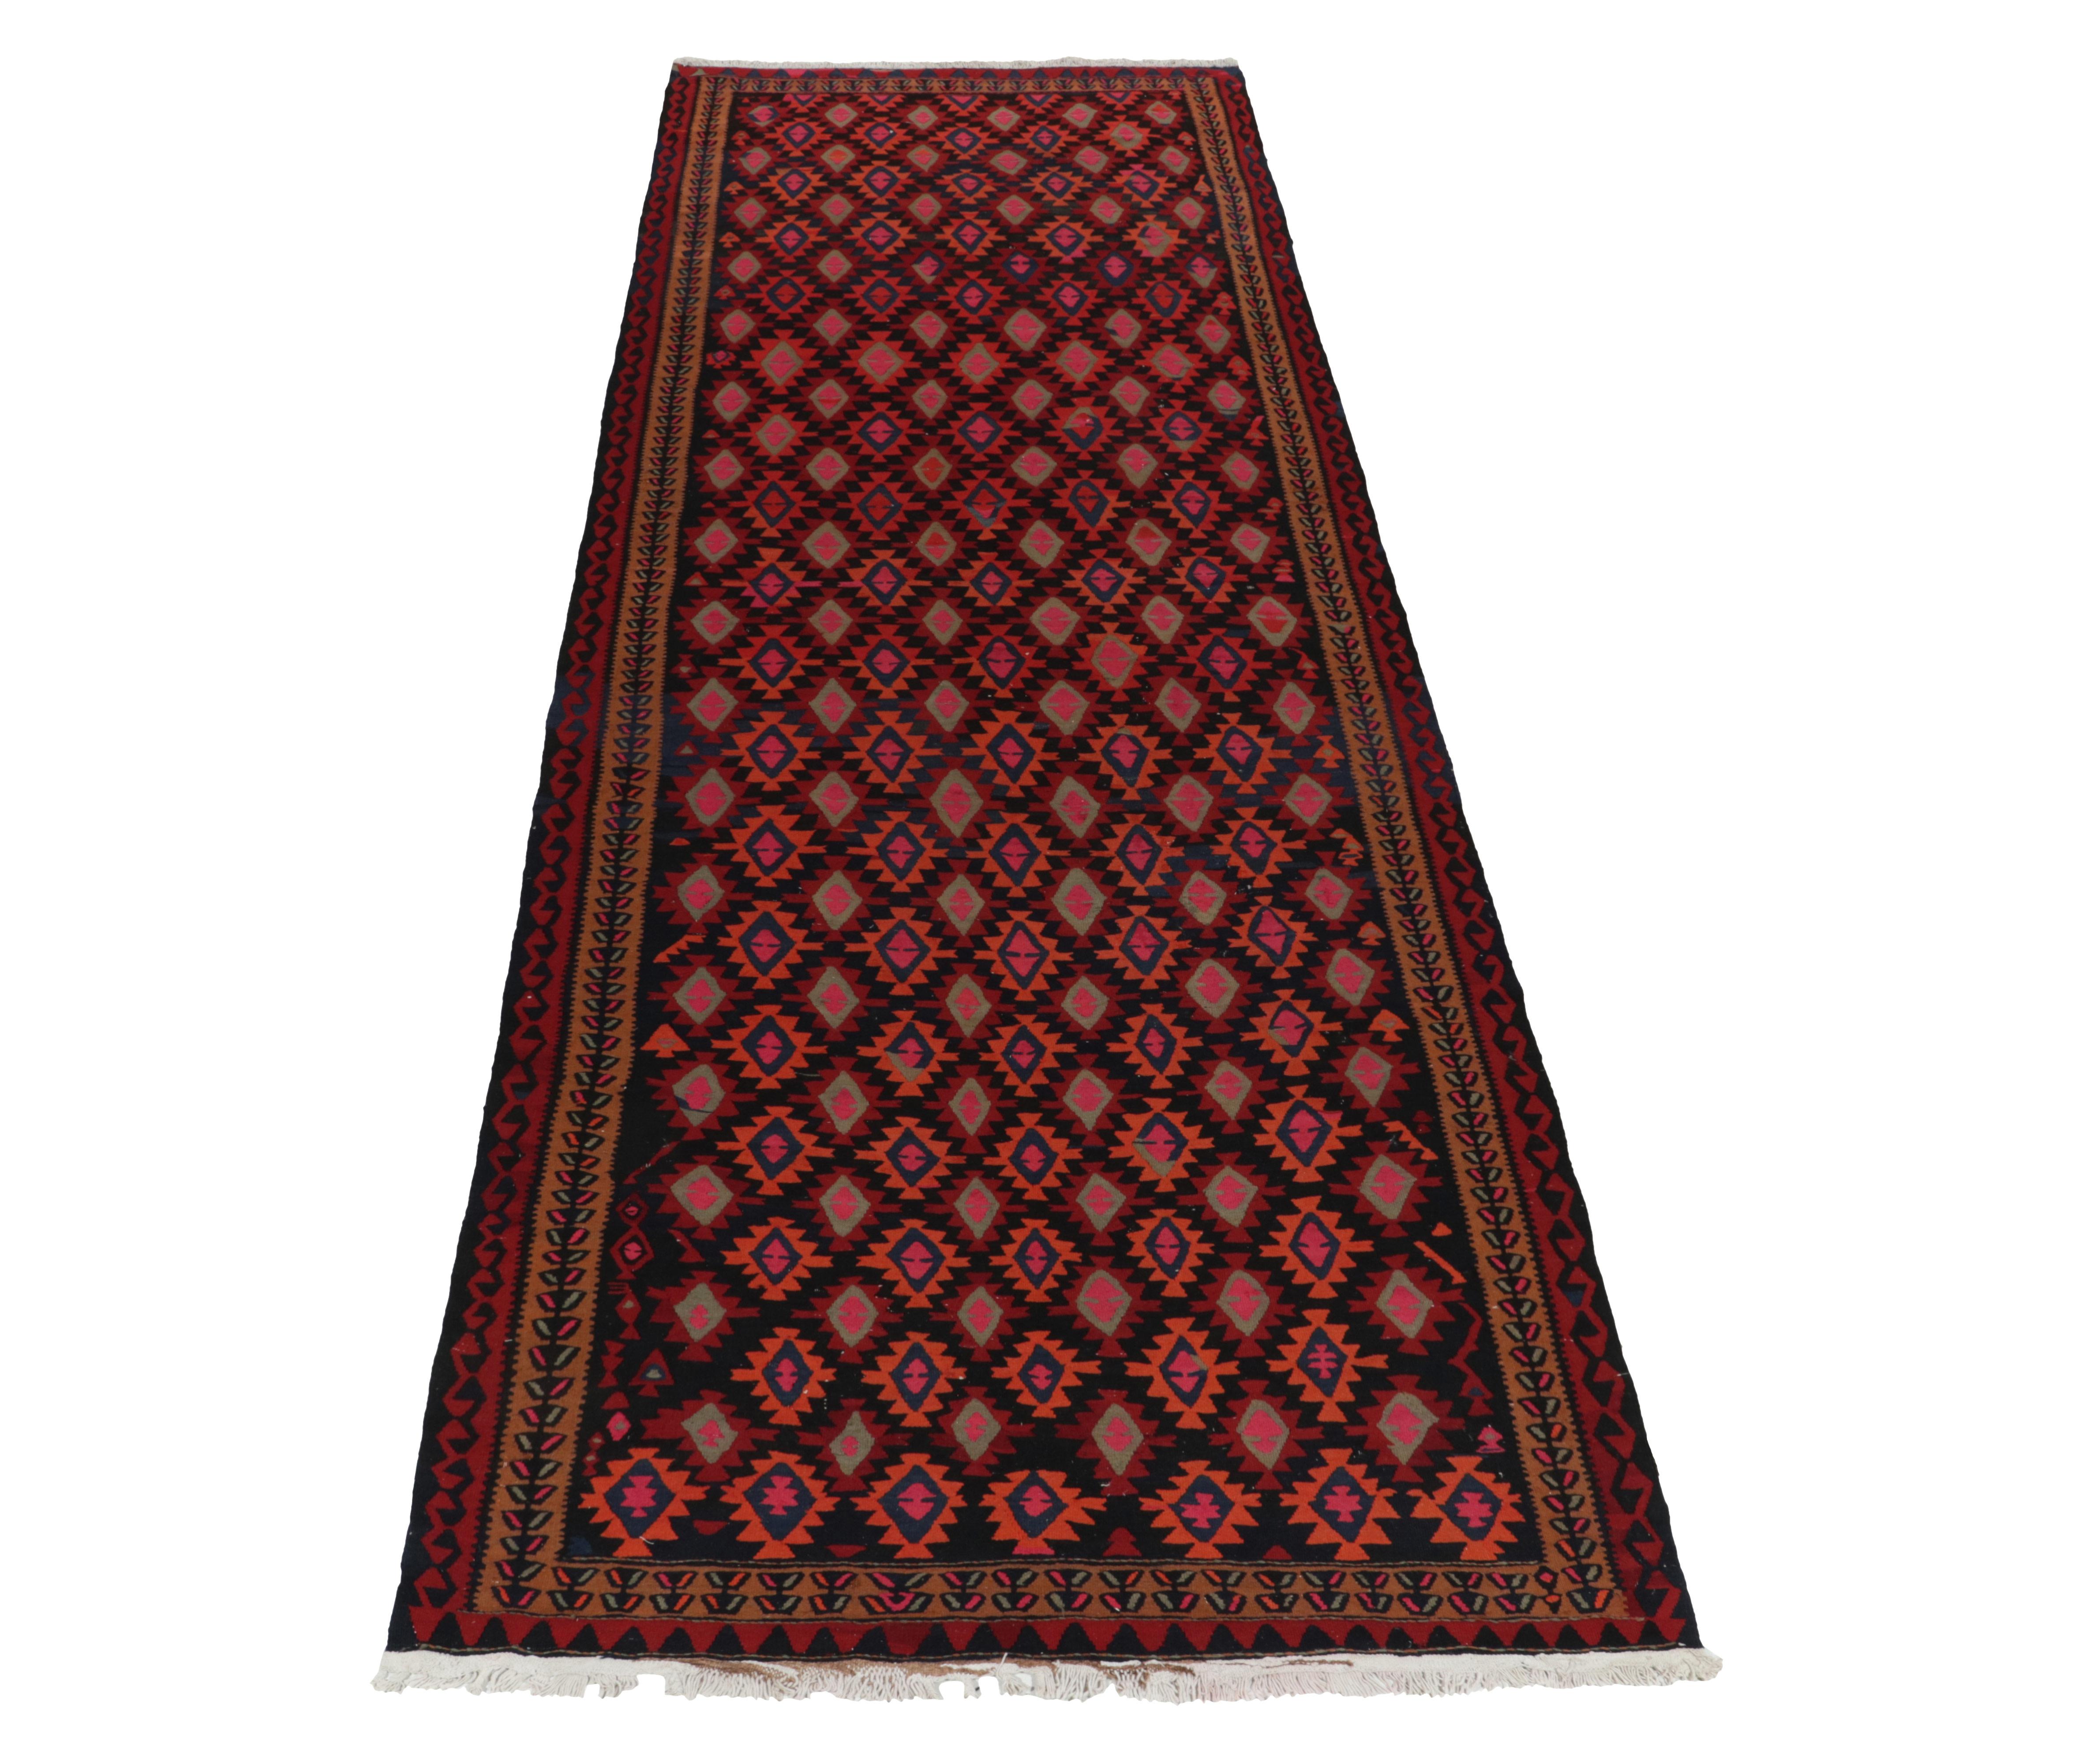 Handwoven in fine wool, a 6x16 vintage kilim rug originating from Turkey circa 1950-1960, now joining our coveted flatweave curations. 

The unique carpet casts a lasting impression with tribal patterns enjoying rich red and black with unusual